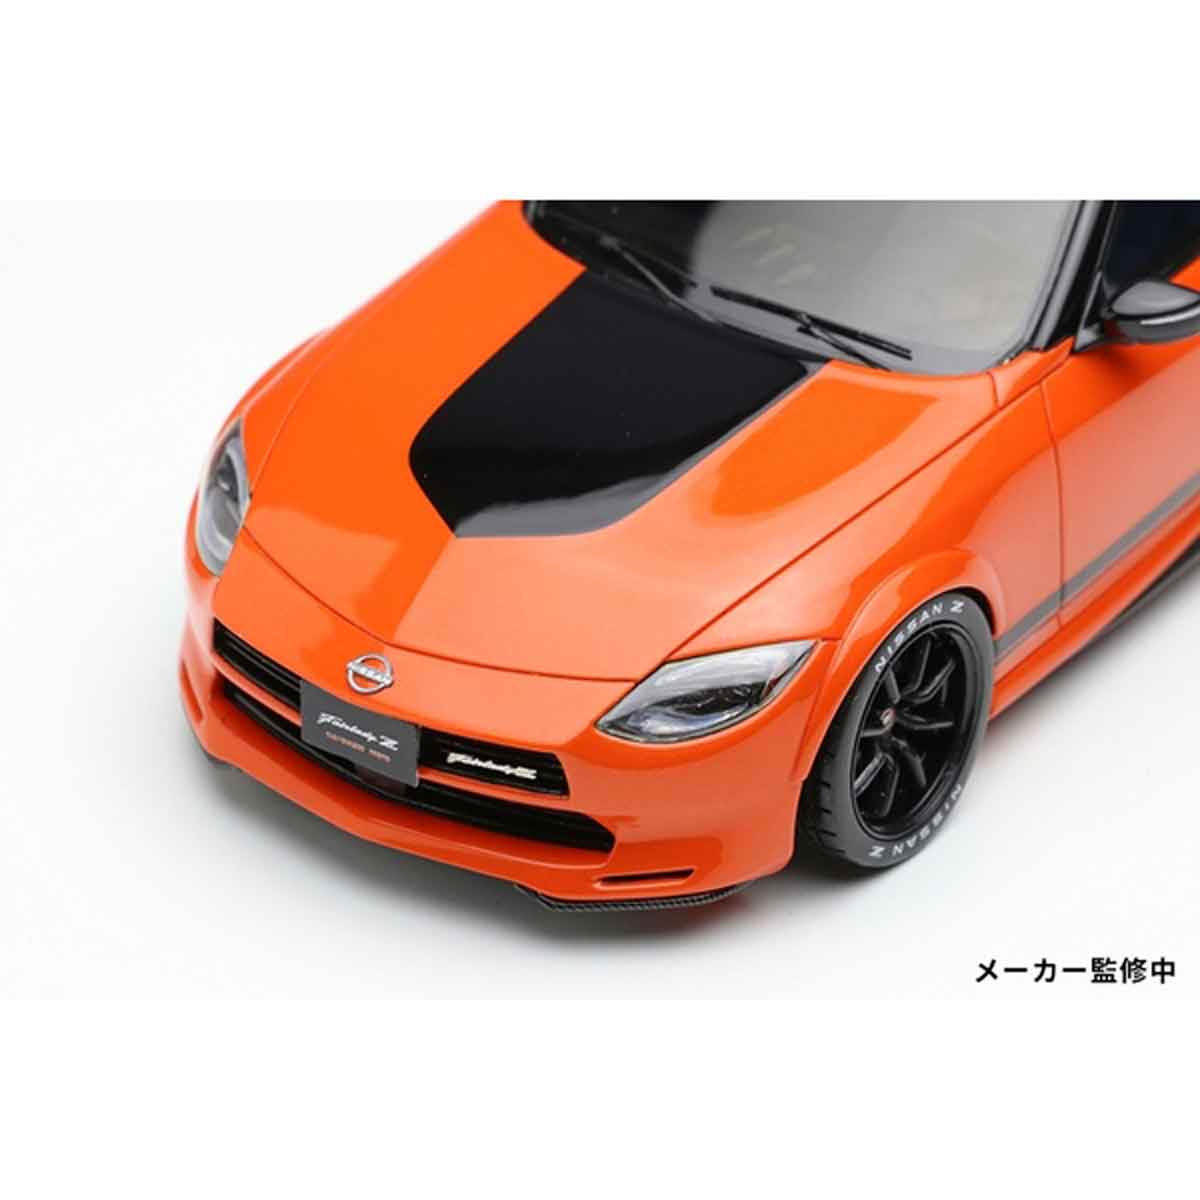 Make Up(メイクアップ) 日産 フェアレディZ カスタマイズドプロト